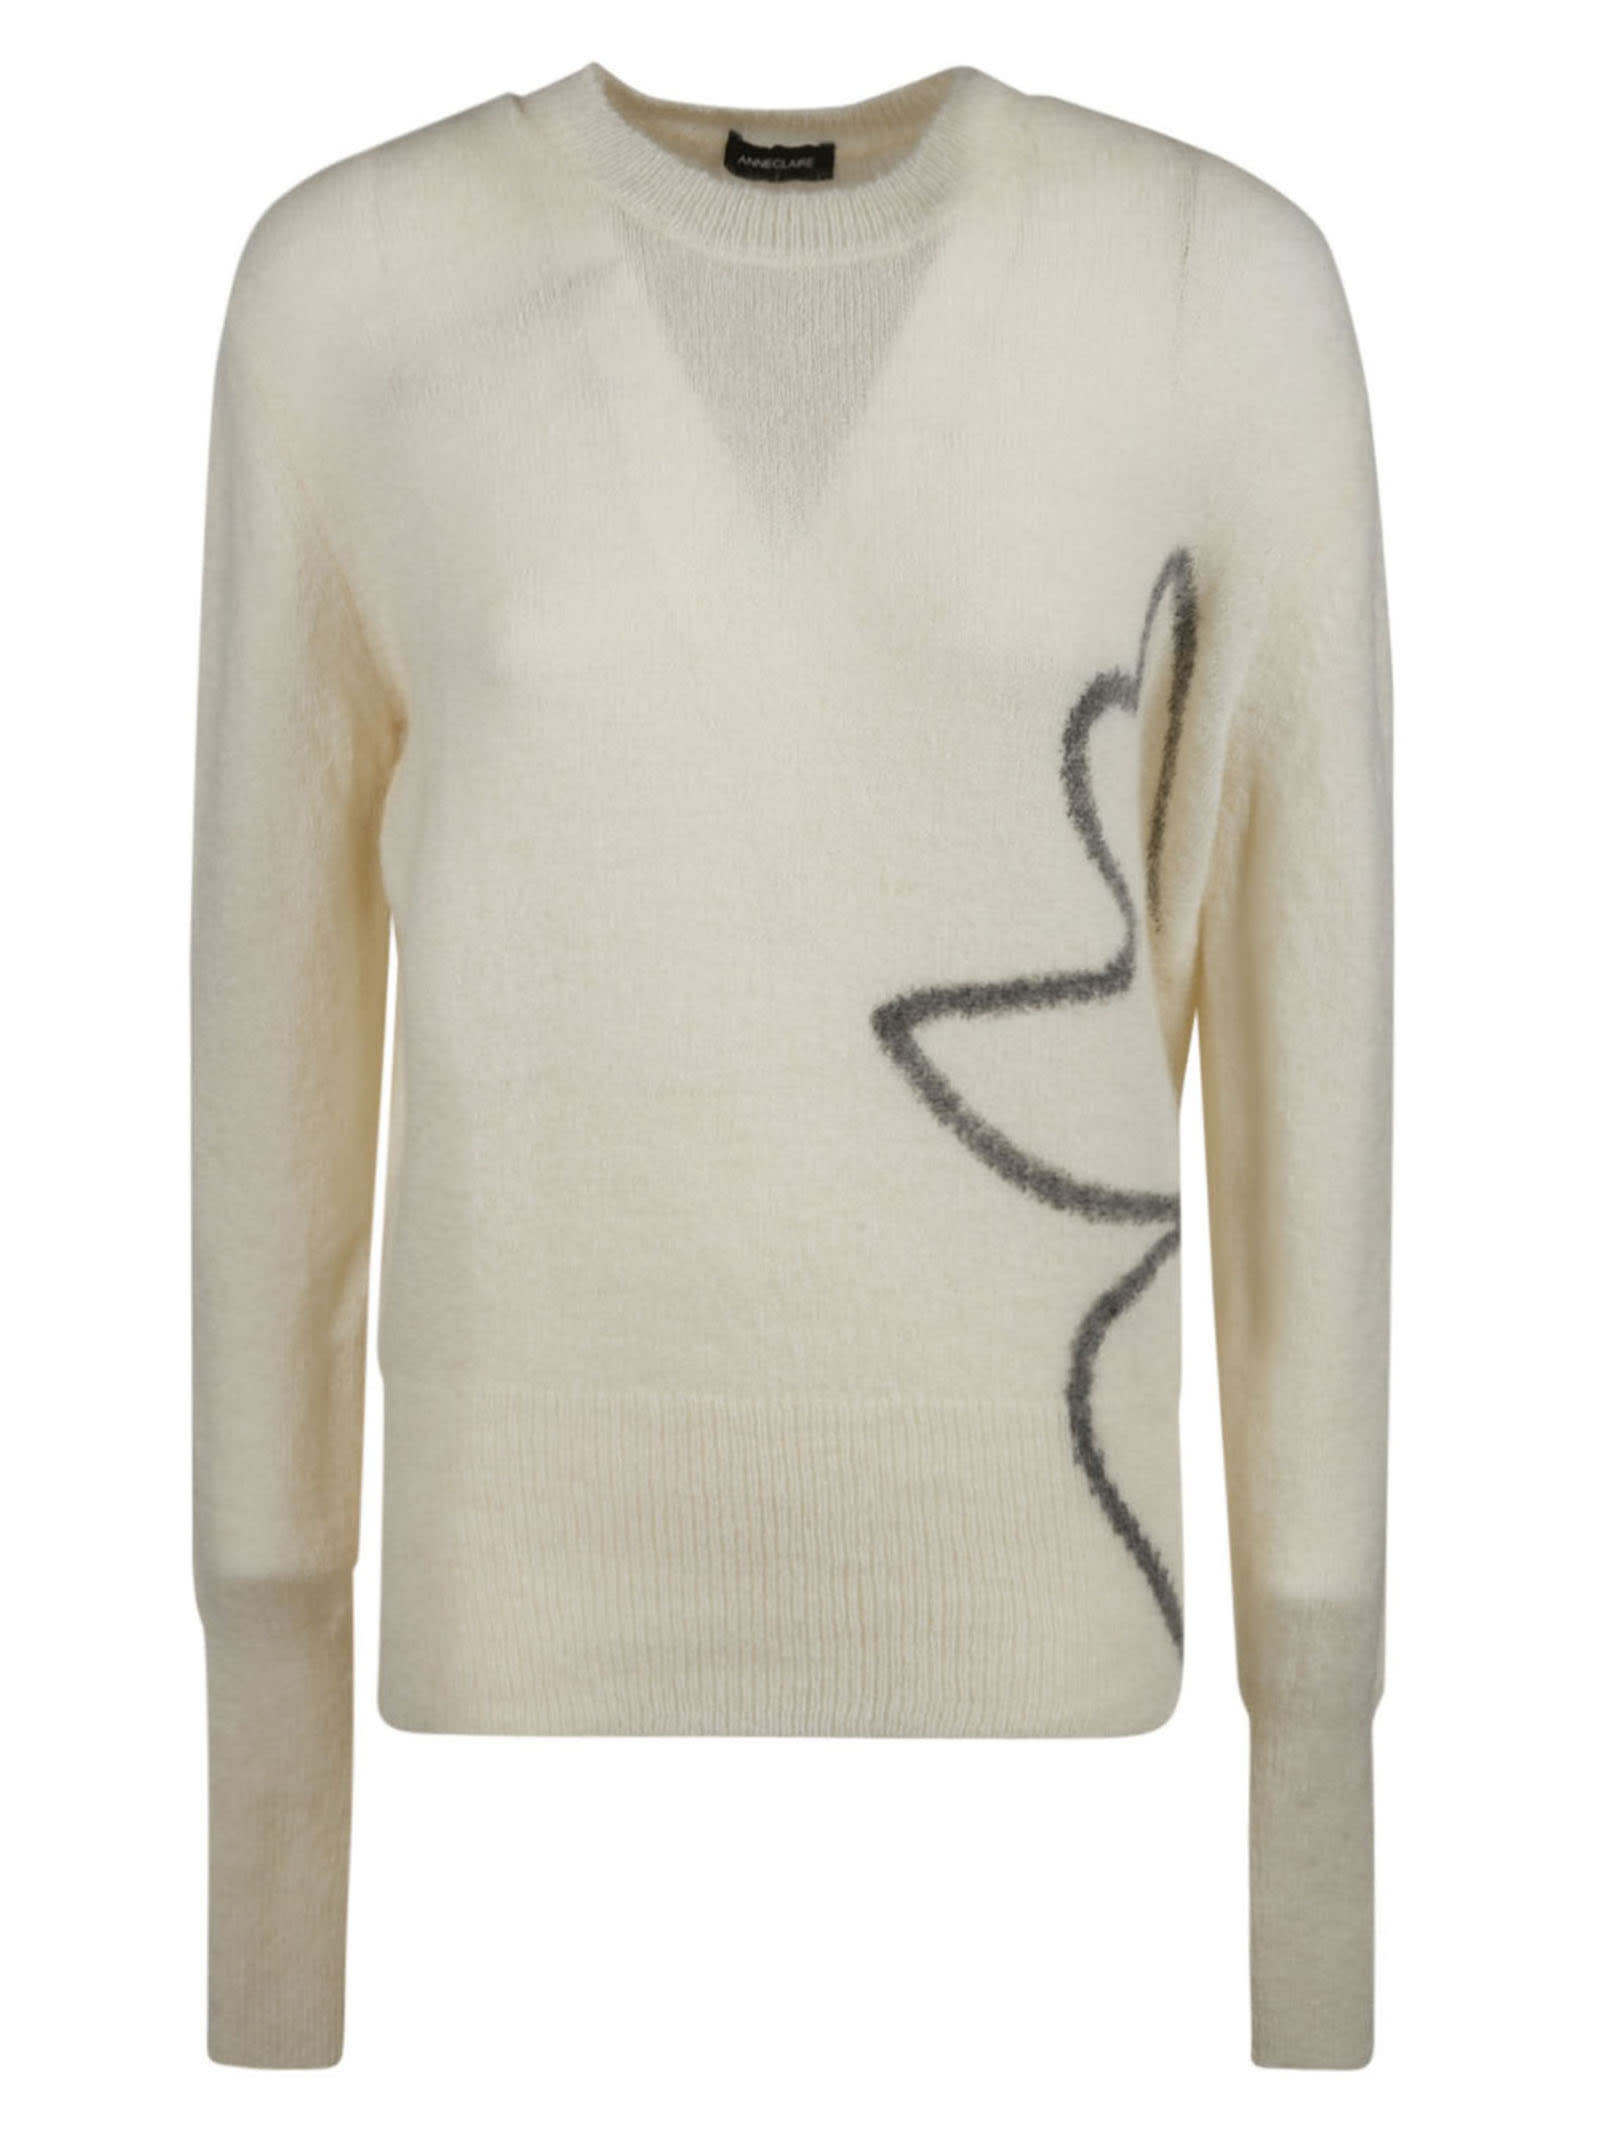 Anneclaire Embroidered Rib Knit Sweater